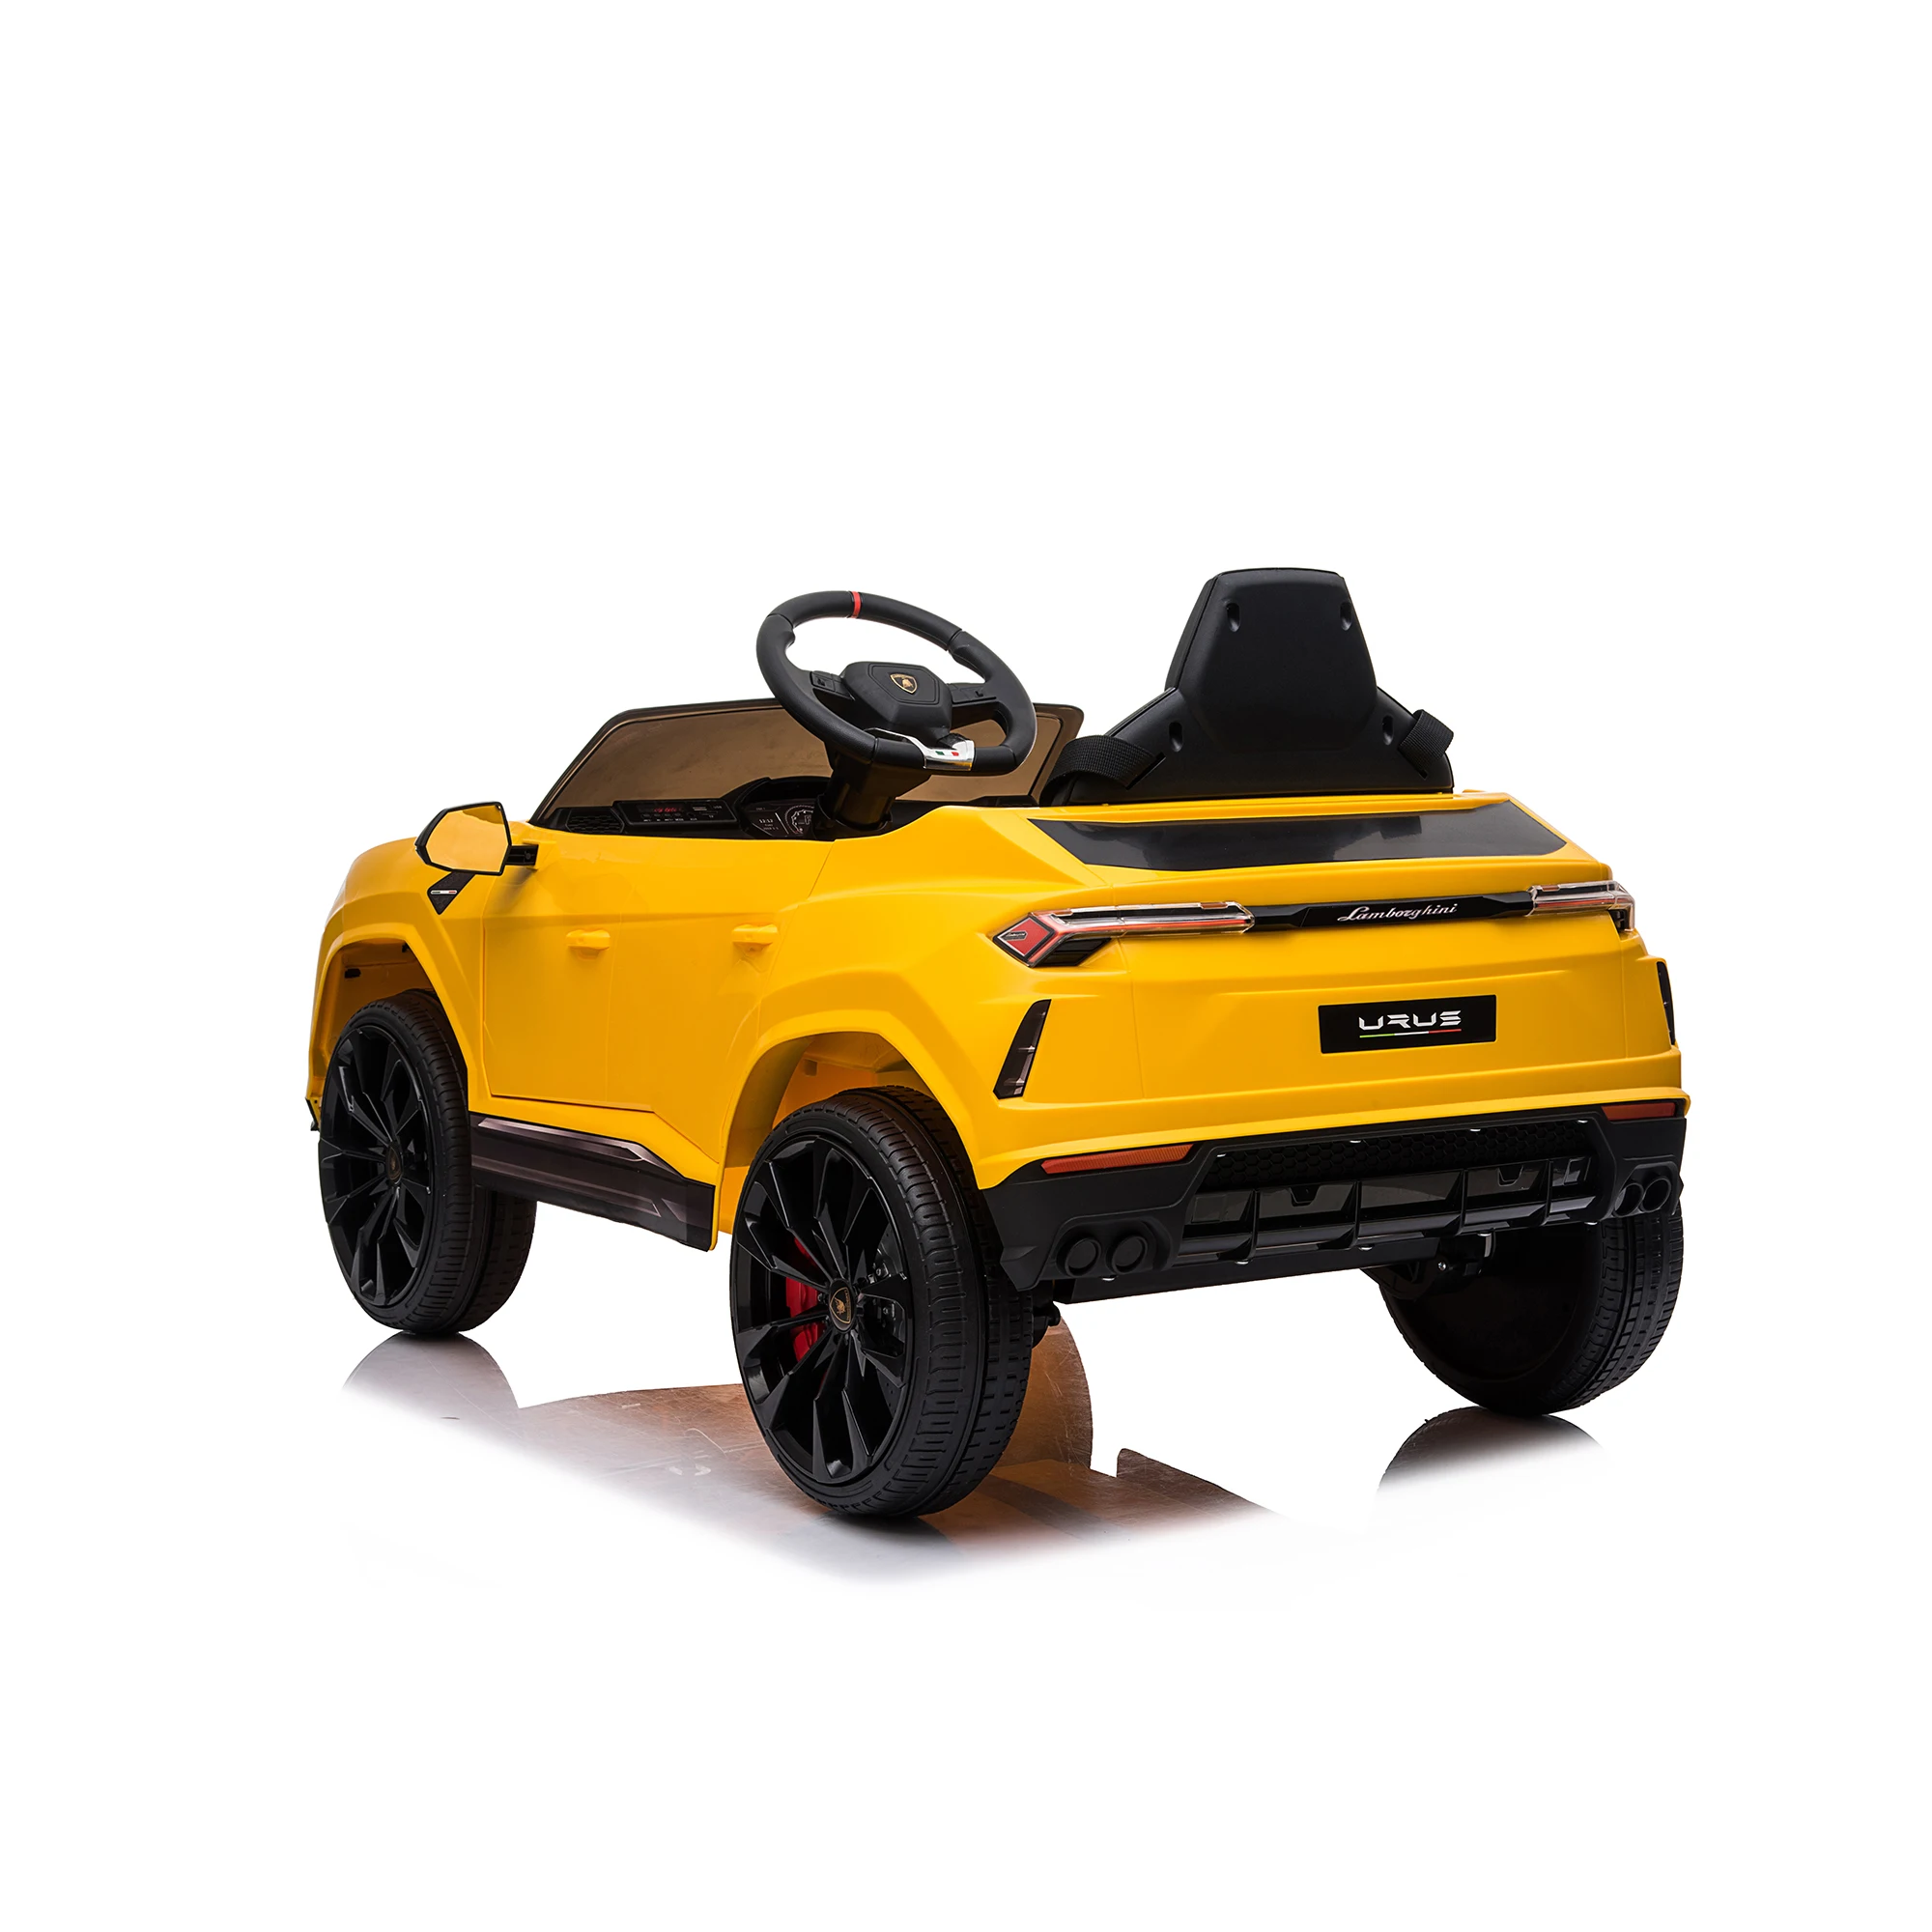 Music LED Headlights 2 Speeds Aux 12V Battery Powered Electric 4 Wheels Kids Toys w/ Parent Remote Control Foot Pedal Black Rock Wheels Licensed Lamborghini Urus Ride On Truck Car Toy 